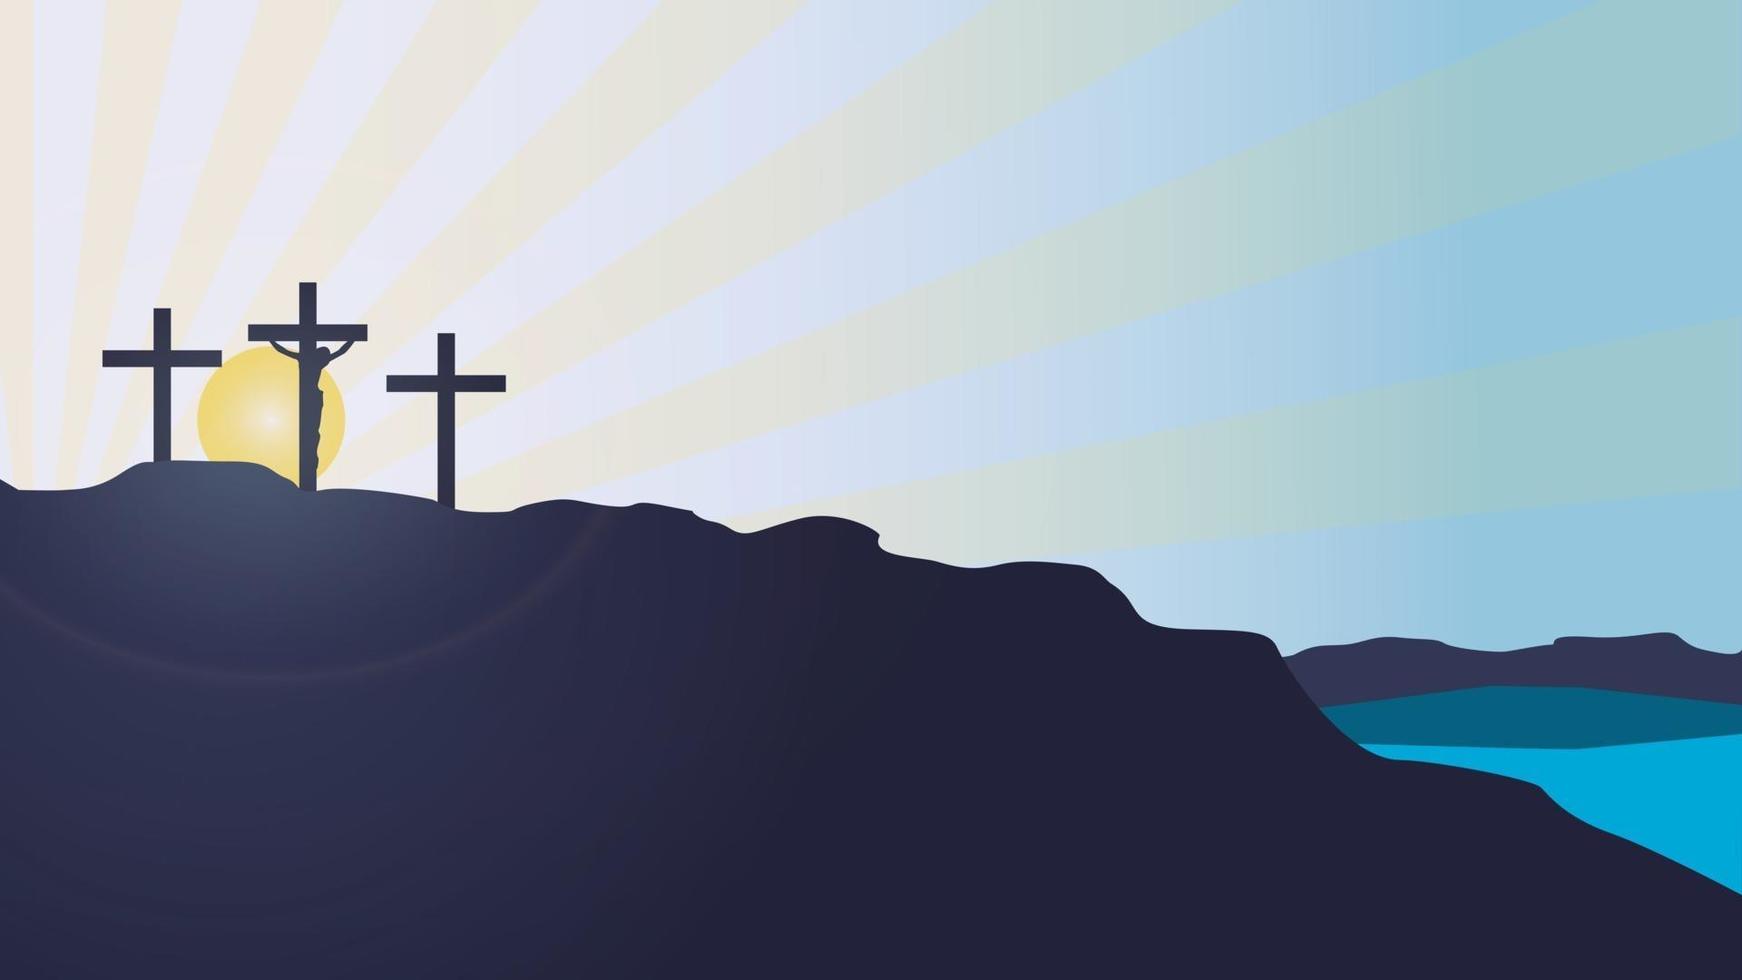 Calvary mountain sunset vector background with silhouette of Christ